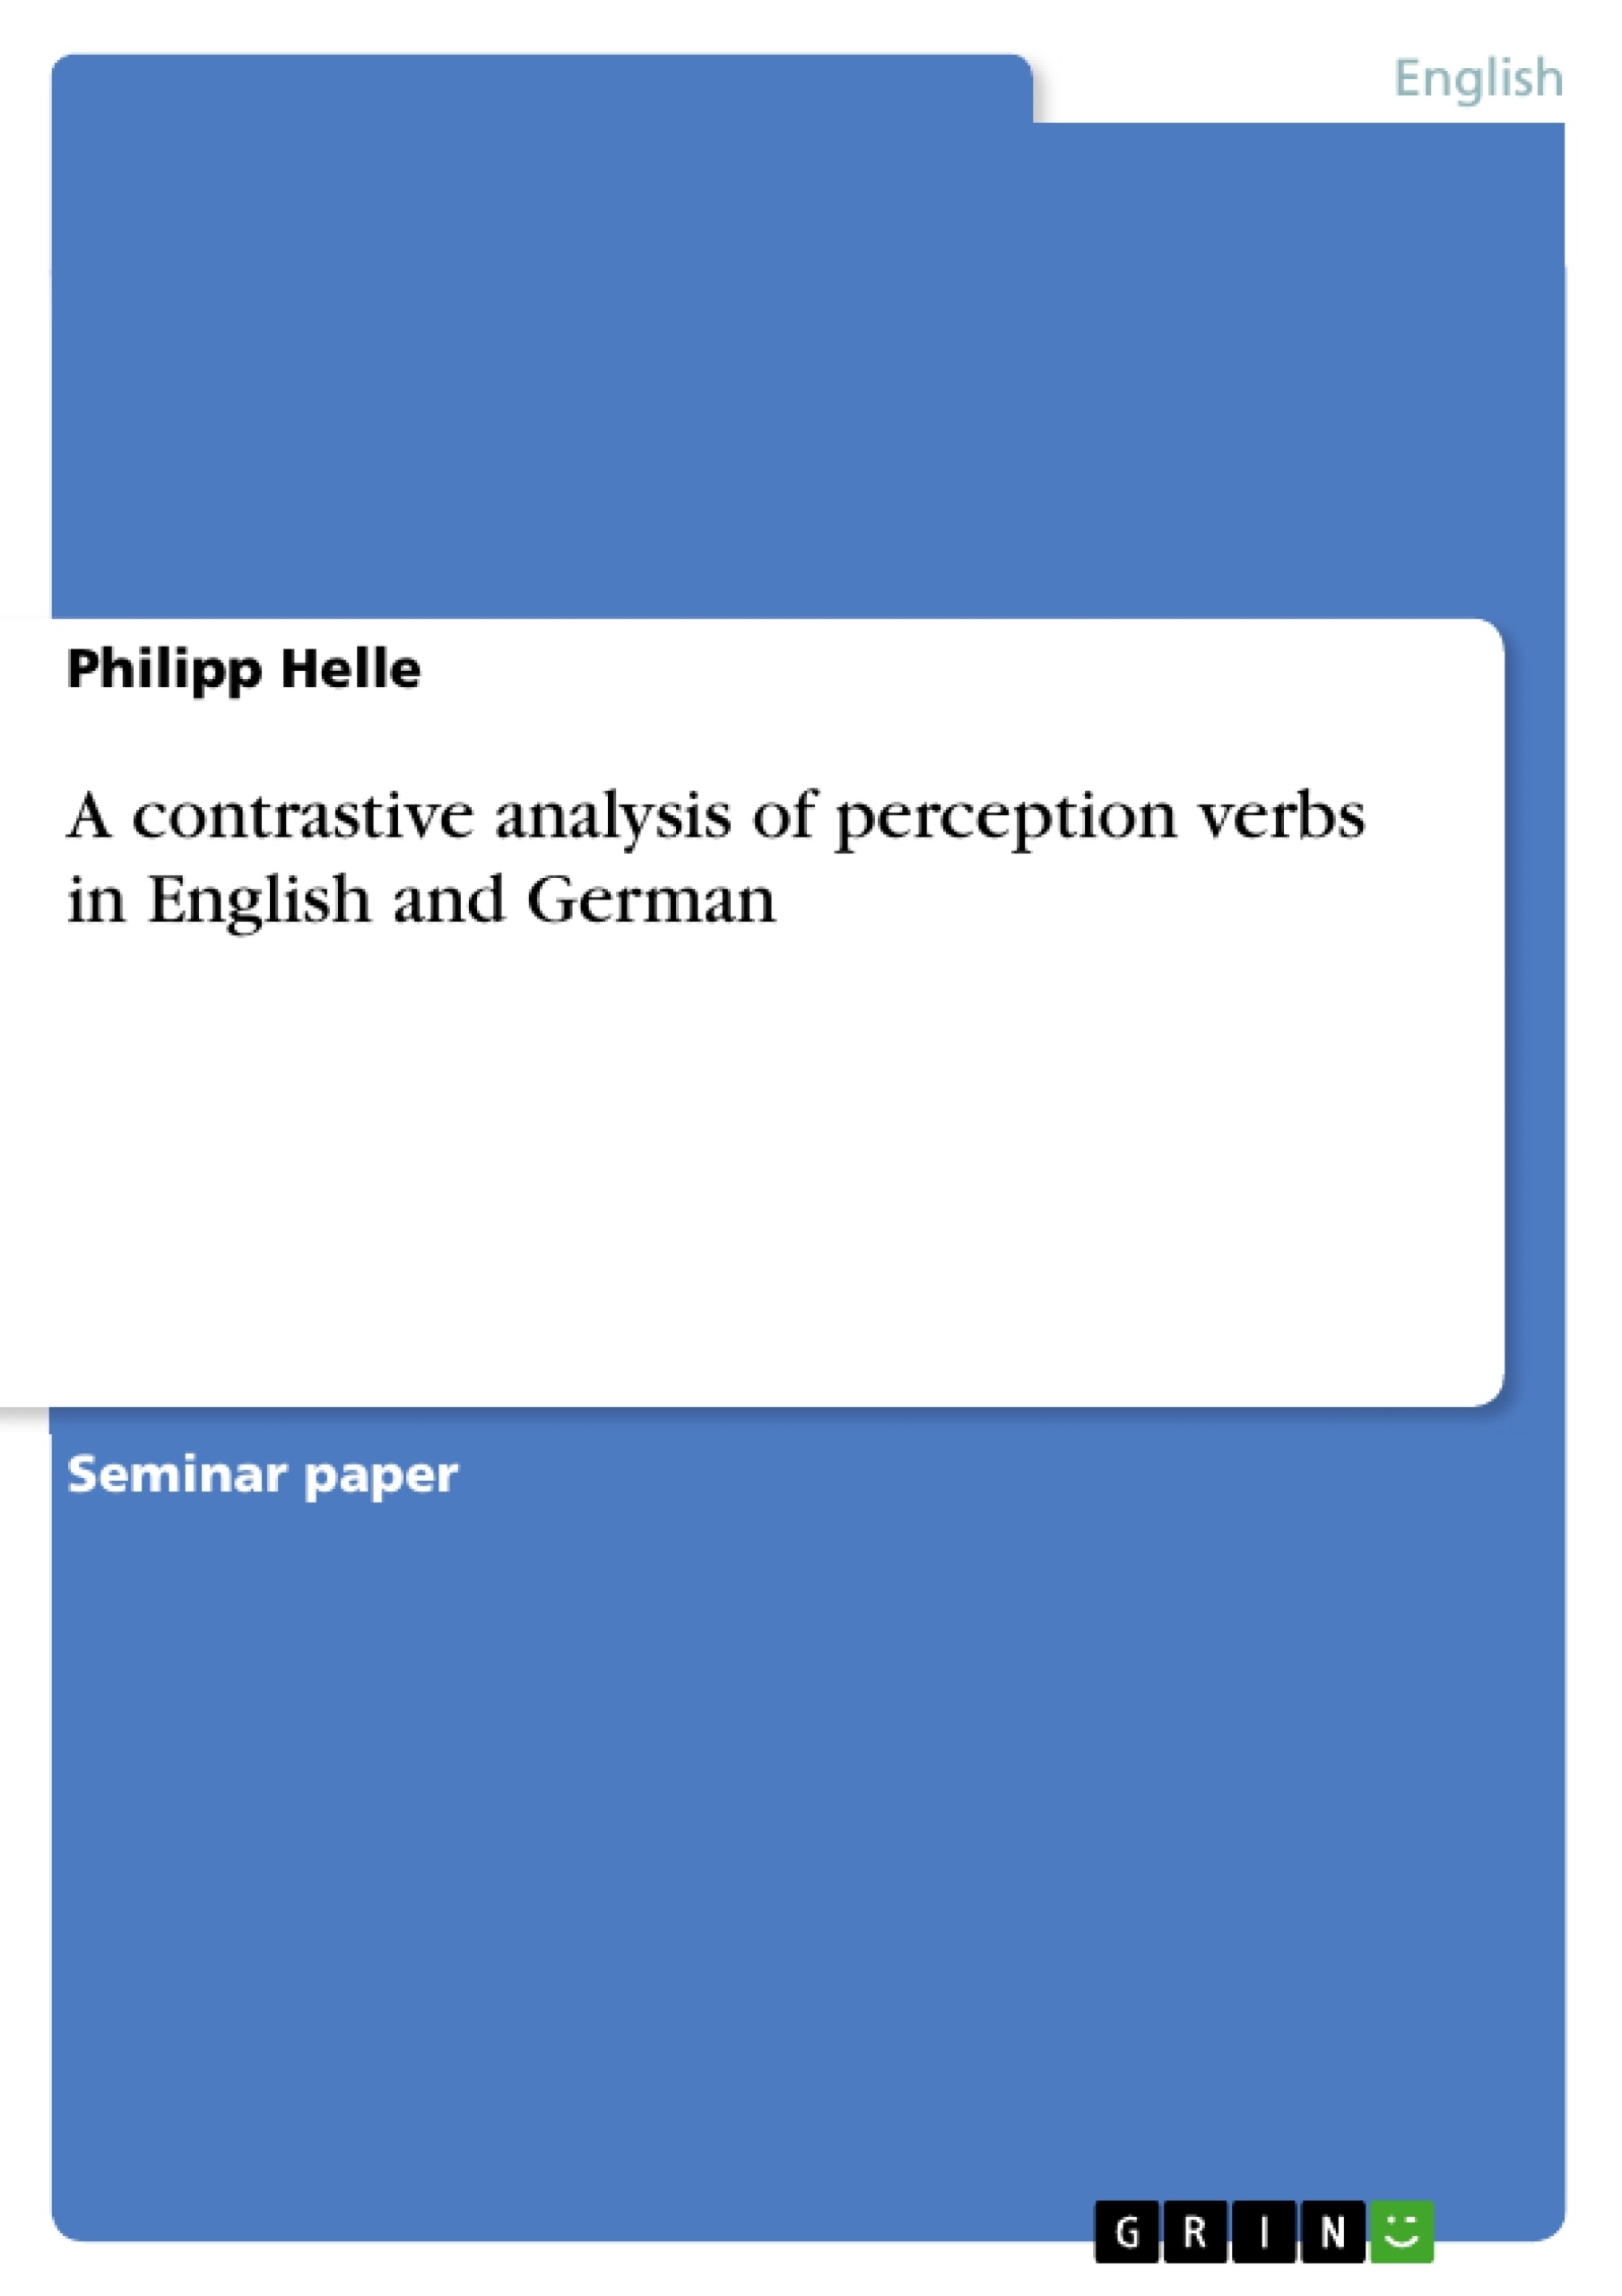 Title: A contrastive analysis of perception verbs in English and German